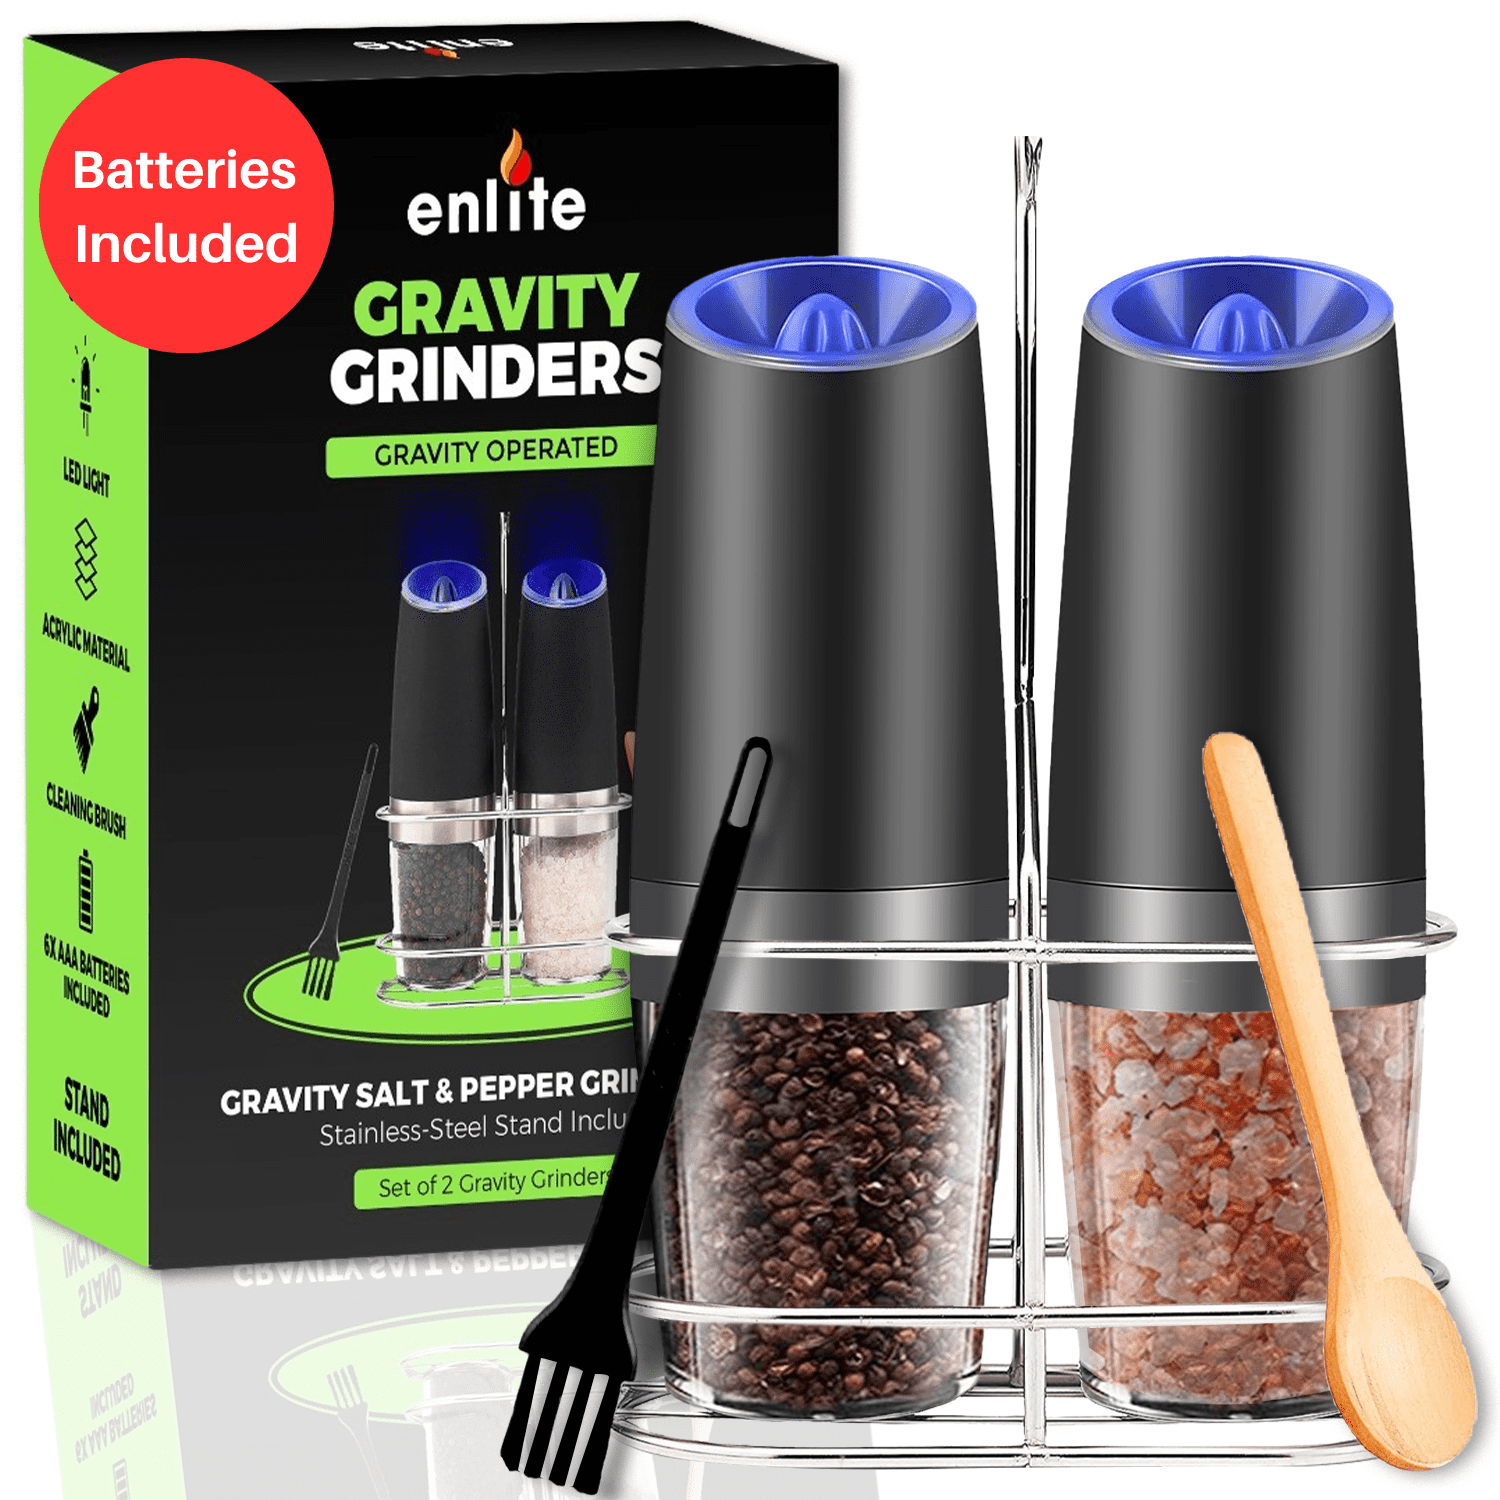 Electric Gravity Salt And Pepper Grinder Mill Set Stand Spice Jar Automatic  Battery Powered Spice Pepper Mills Grinder